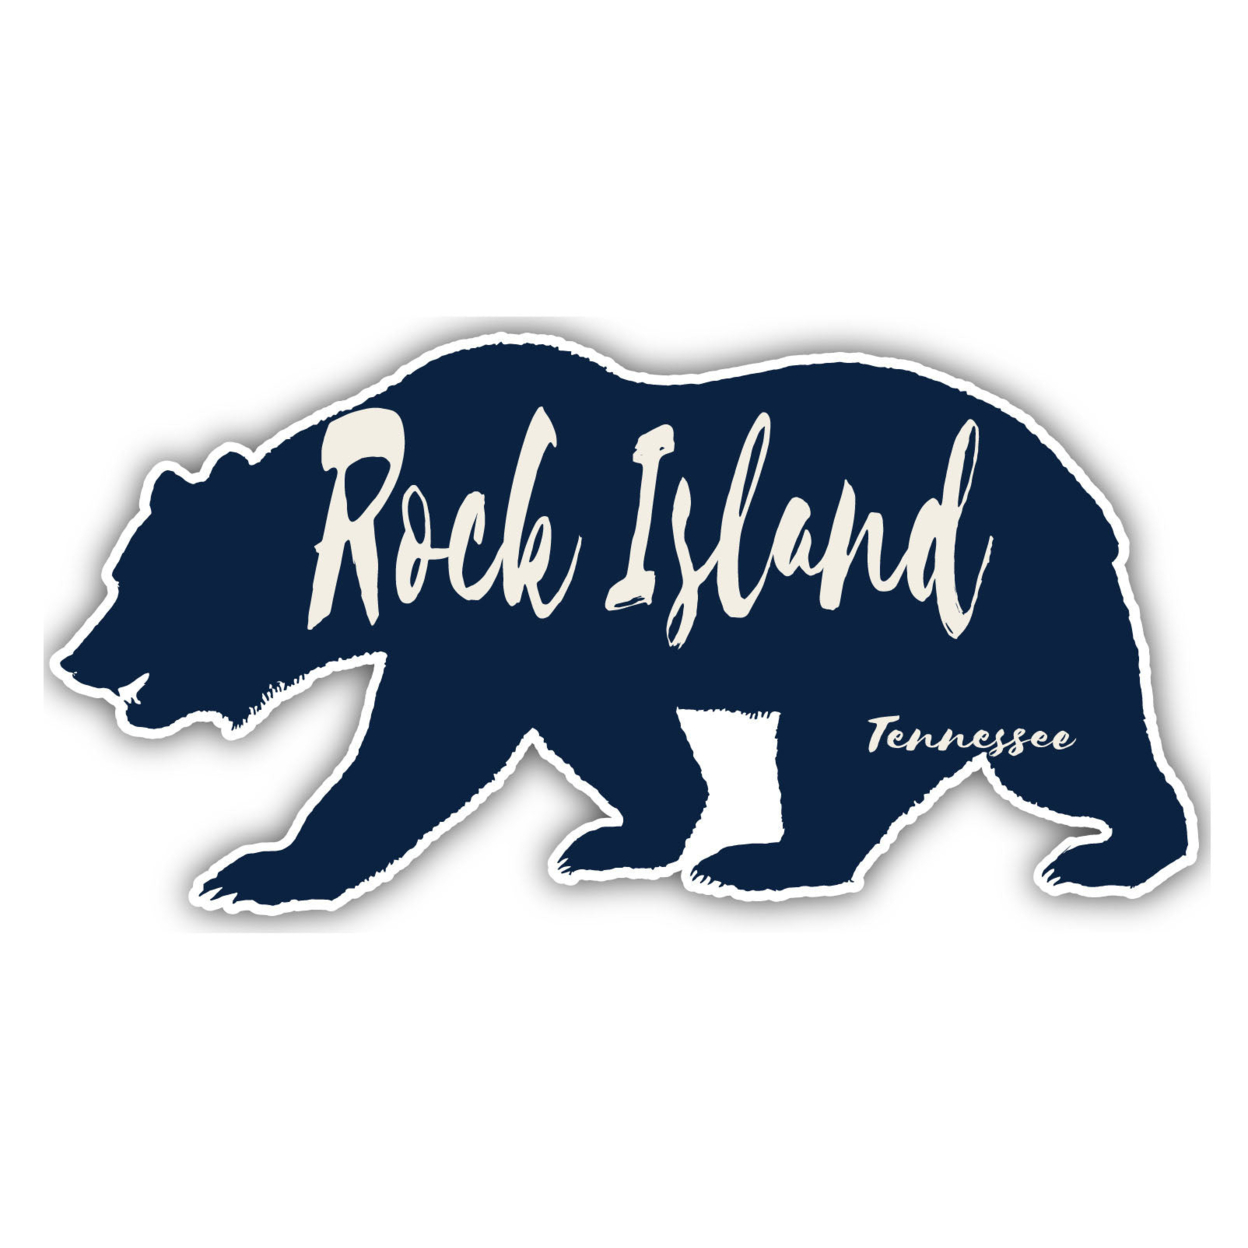 Rock Island Tennessee Souvenir Decorative Stickers (Choose Theme And Size) - Single Unit, 2-Inch, Adventures Awaits